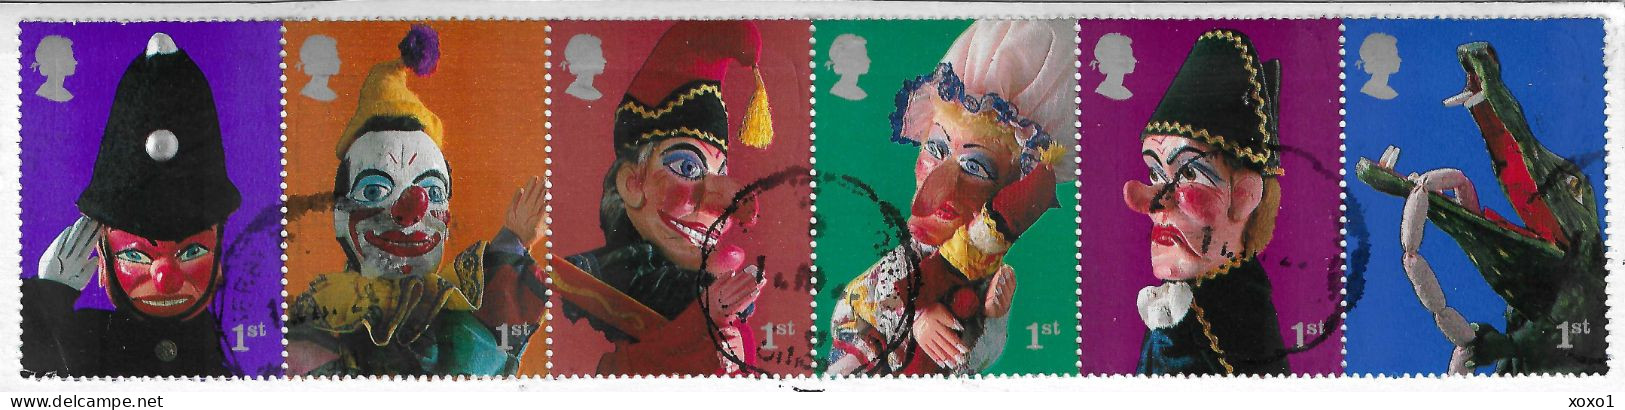 Great Britain 2001 MiNr. 1946 - 1951 Großbritannien Hand Puppet Theater: Punch And Judy Childhood Dolls 6v Used 7.50 € - Puppen